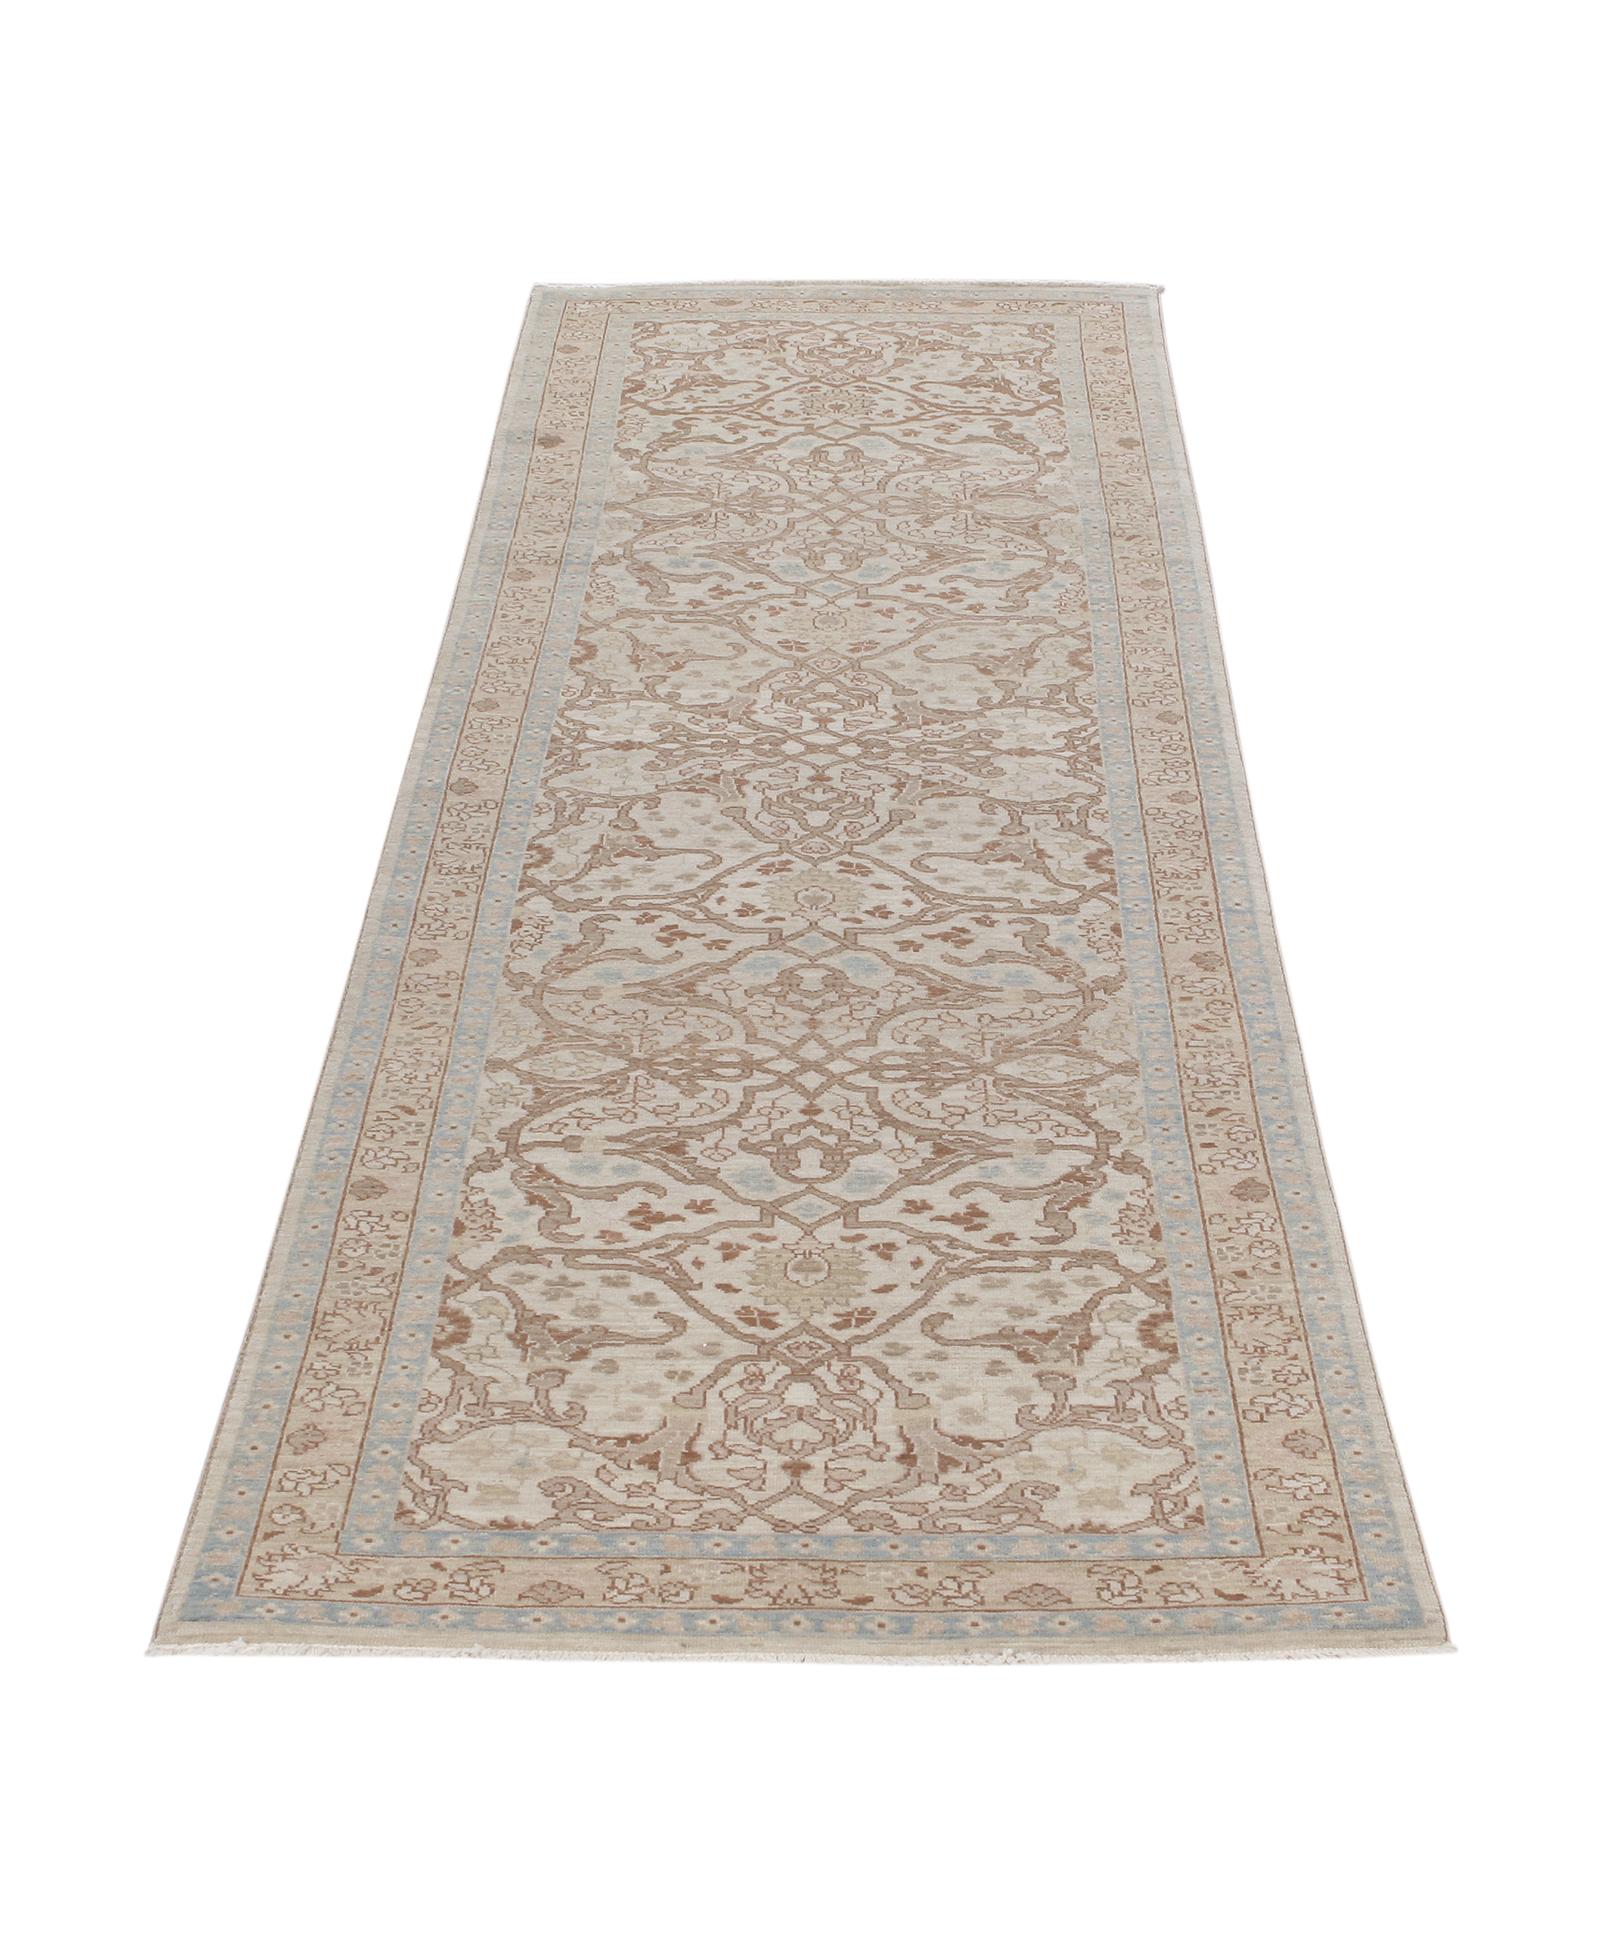 This Persian Tabriz hand-knotted runner rug is made from the finest hand-carded, hand-spun wool, and is distinguished by its excellent weave, and by the remarkable adherence to the classical traditions of Persian rug design. The city of Tabriz, in